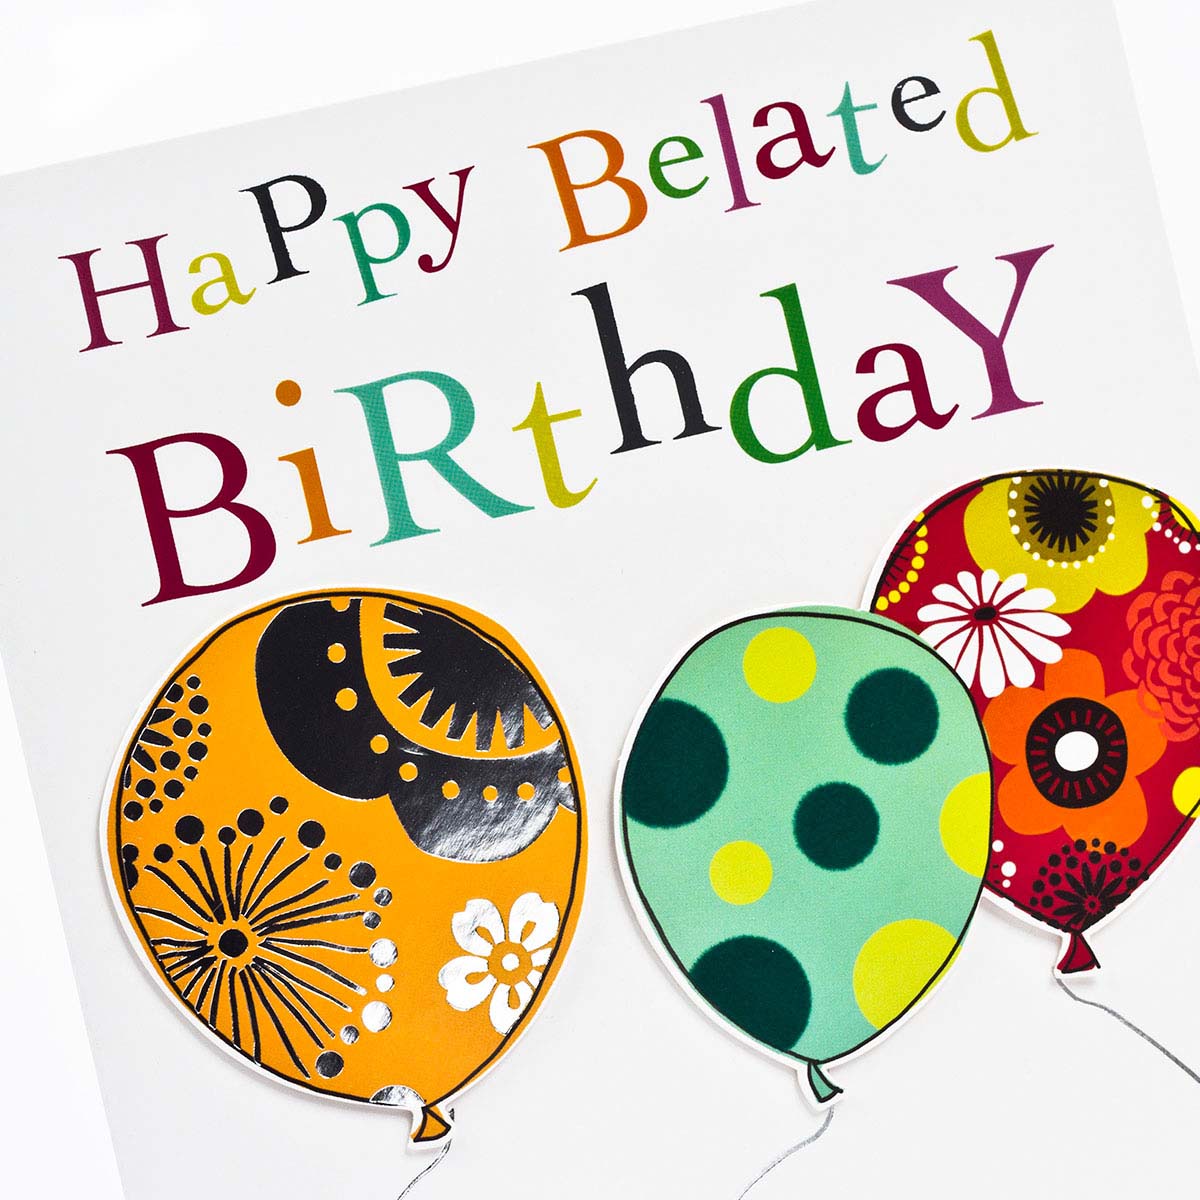 Happy Belated Birthday - Belated Birthday Wishes, Messages